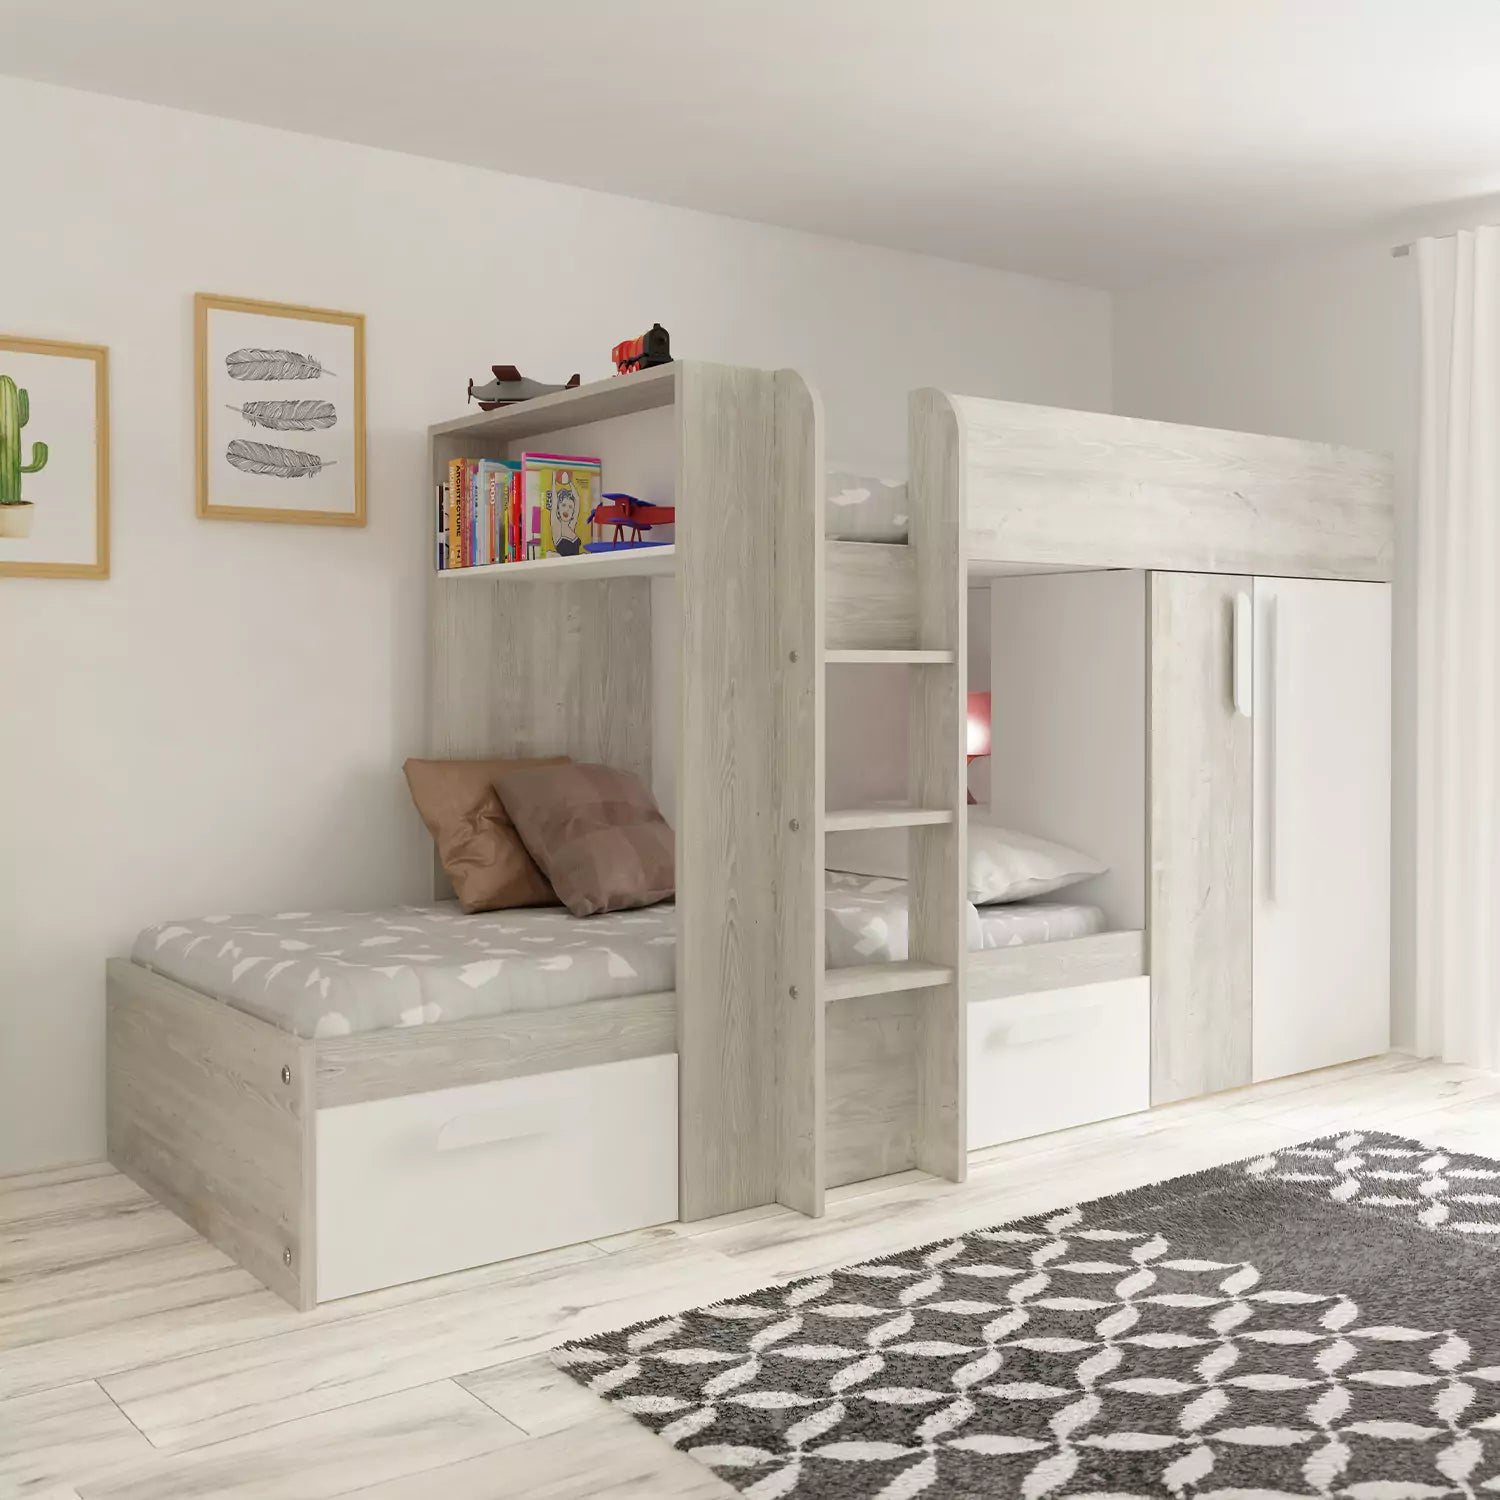 An image of Trasman Barca Bunk Bed with Drawers & Wardrobe - White